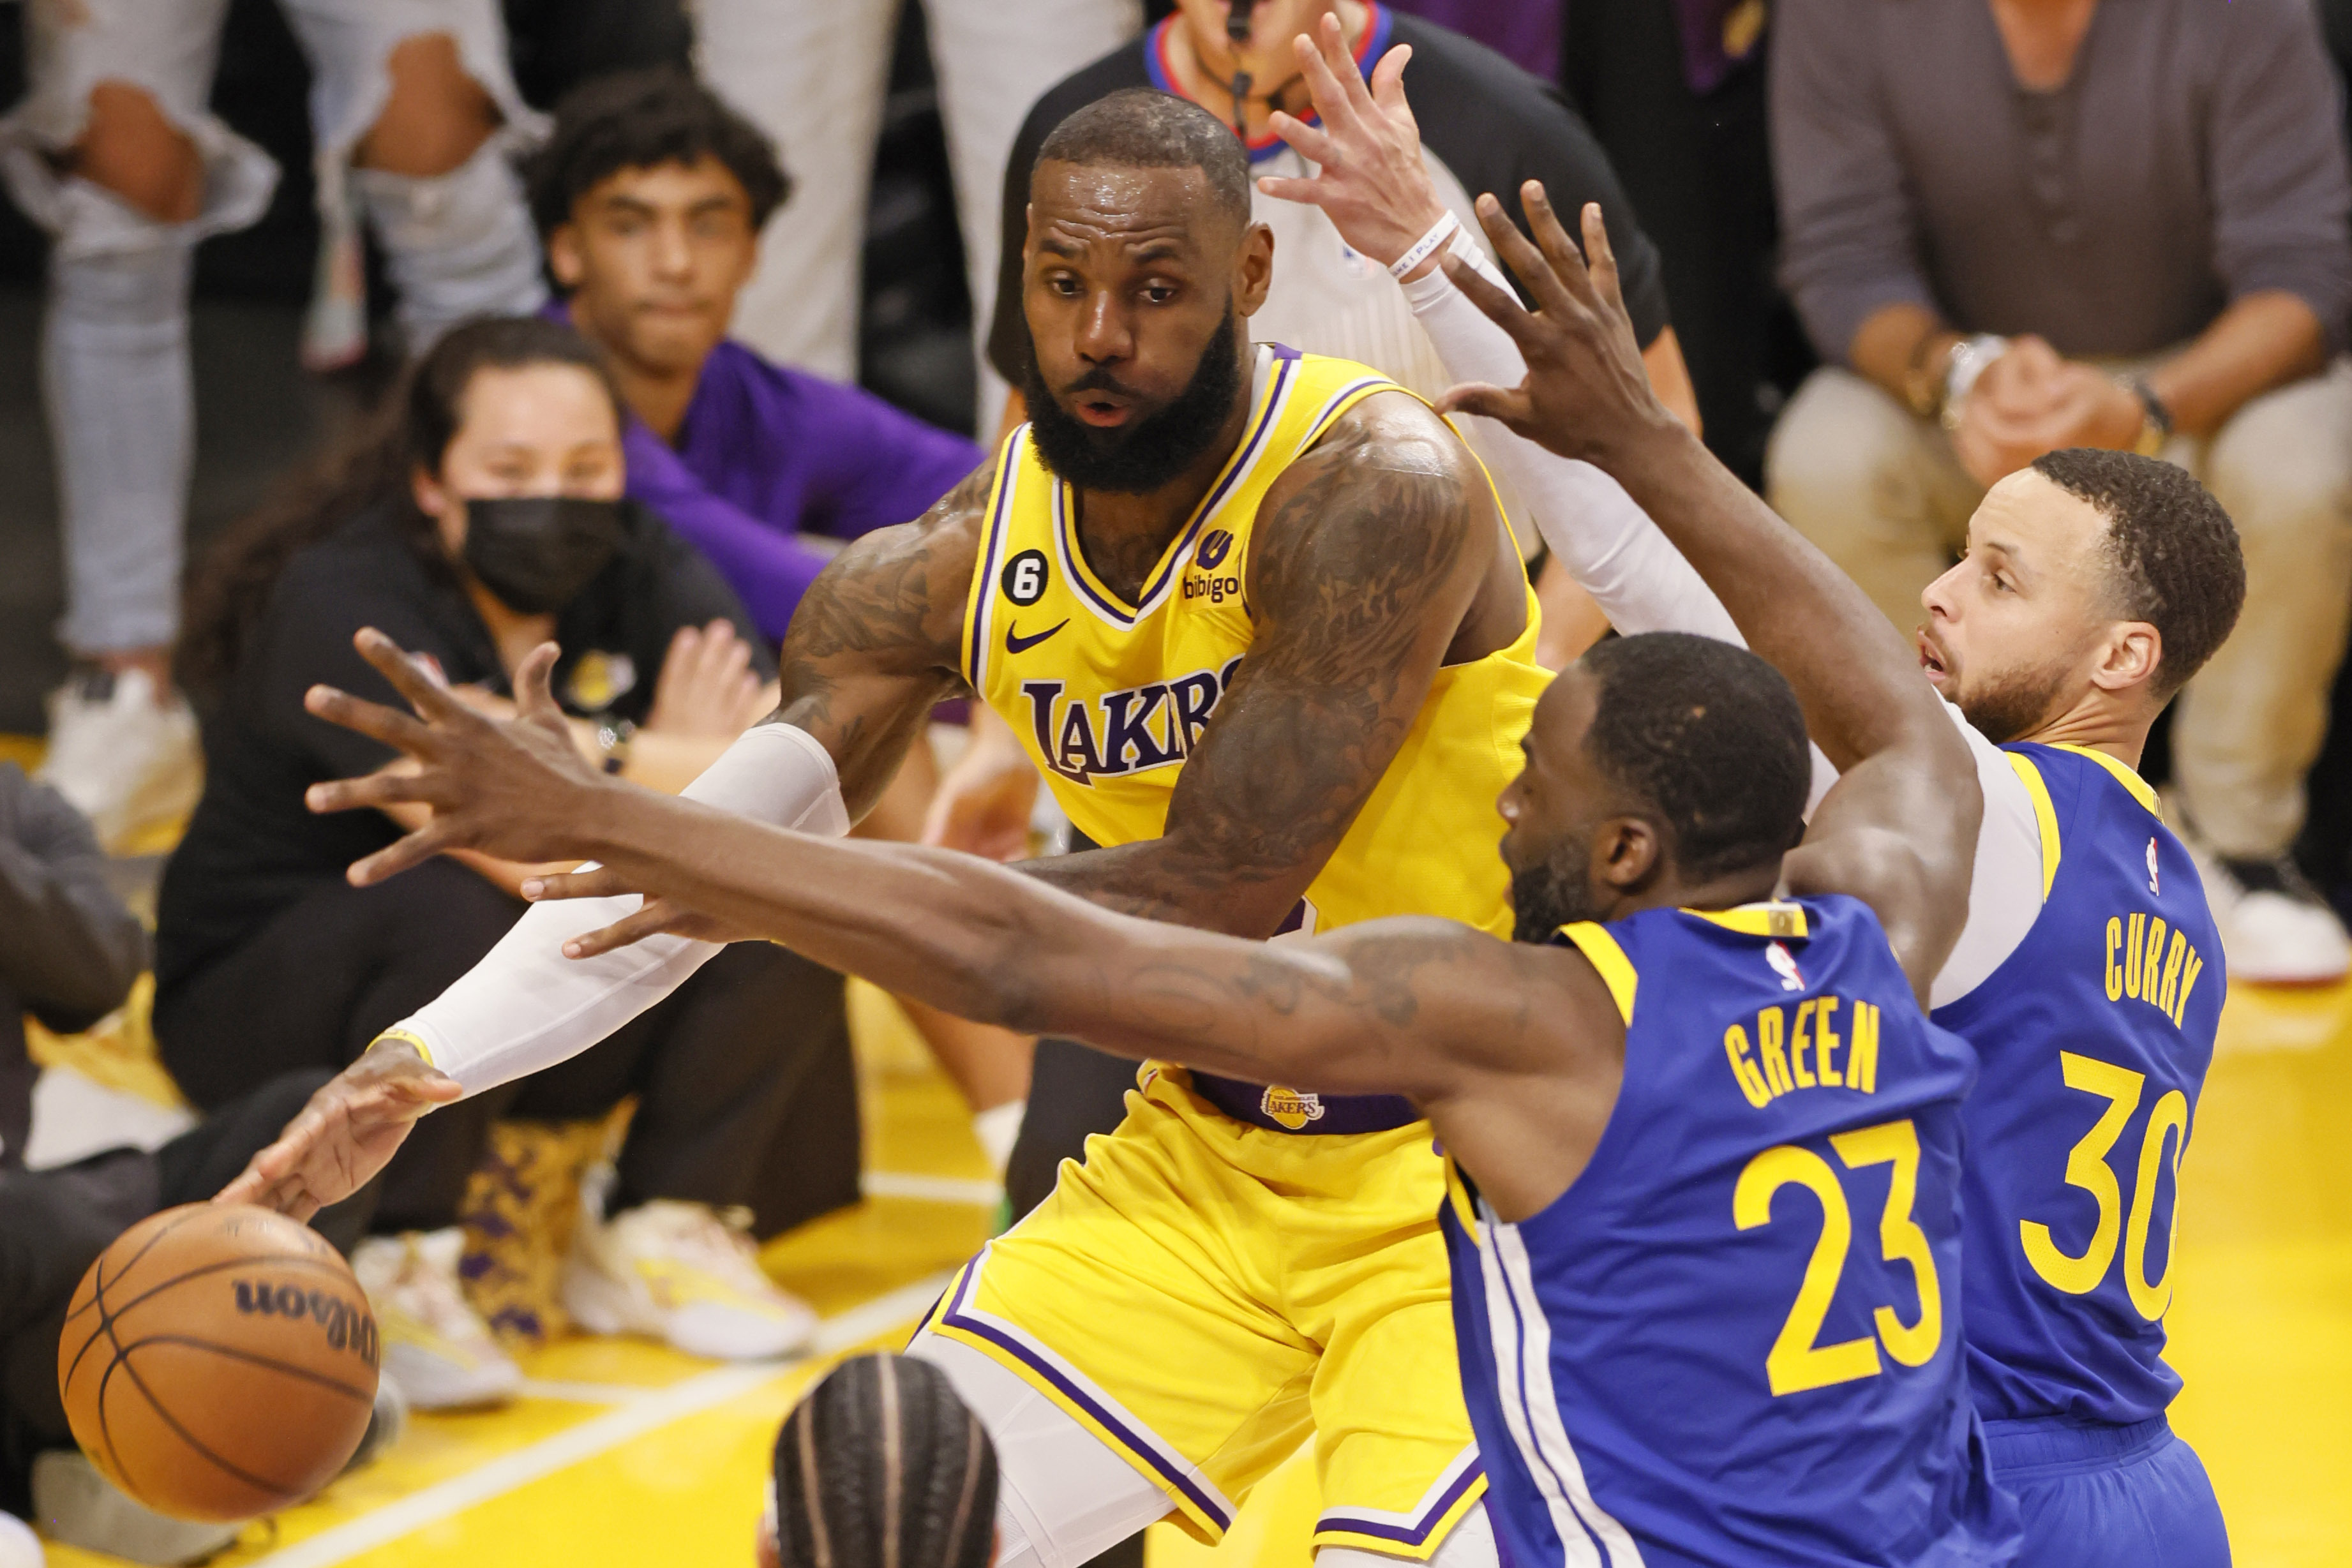 Warriors vs. Lakers Game 1: Live stream, how to watch NBA Playoffs